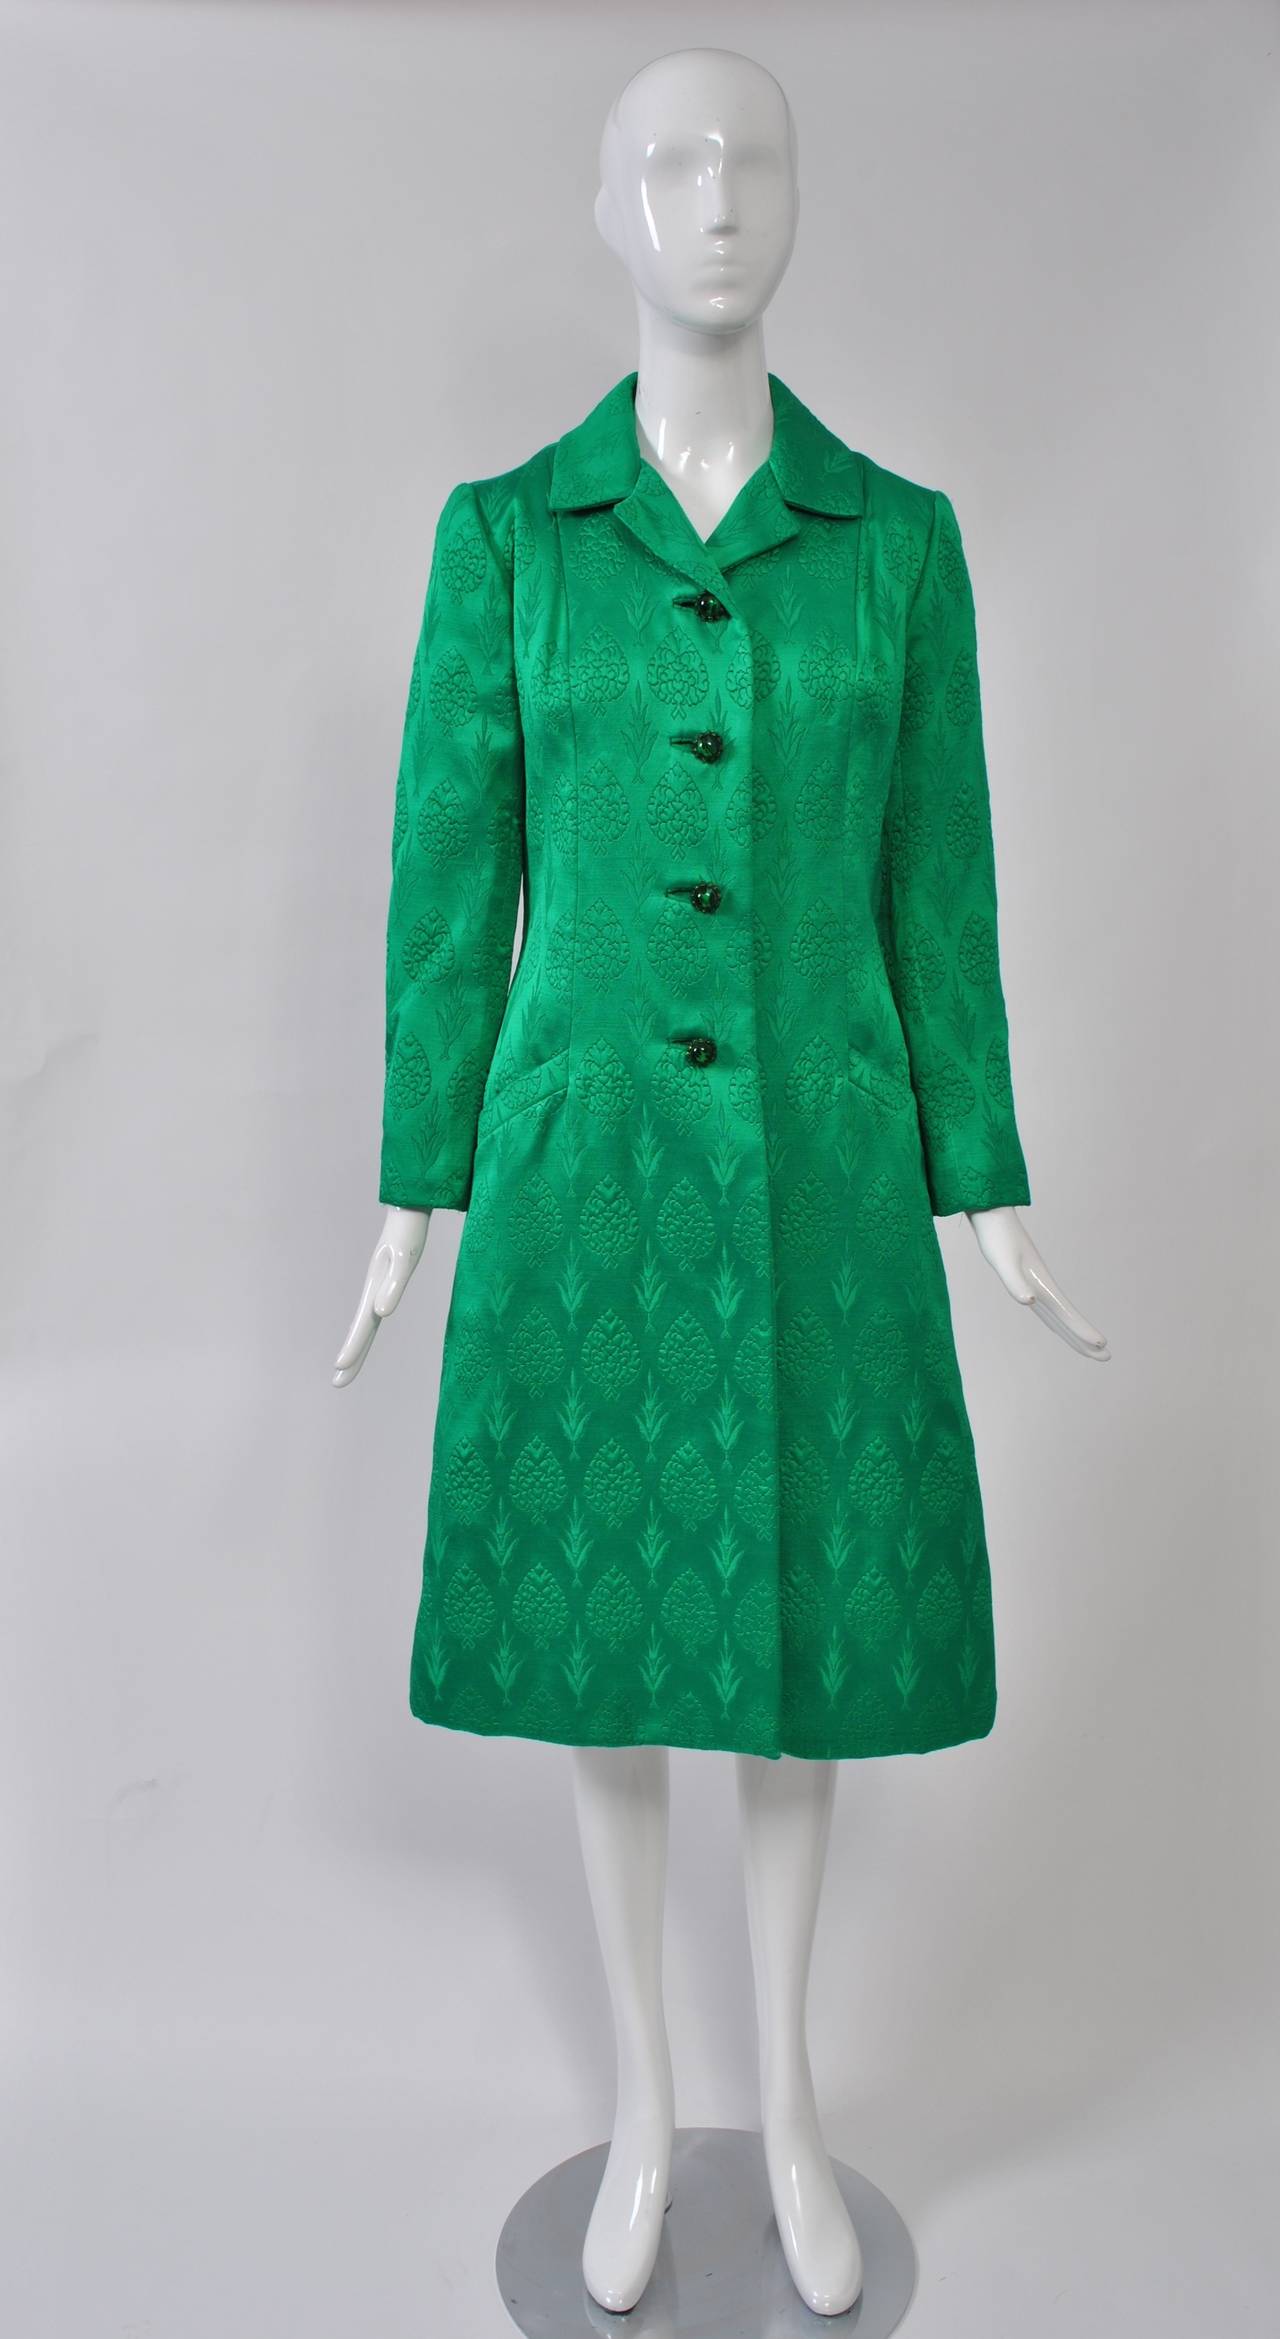 You will definitely get noticed in this bright green evening coat that is richly detailed with a repeating tree pattern. The single-breasted, A-line coat features bound buttonholes with matching stone buttons, slash pockets, a back belt, and back